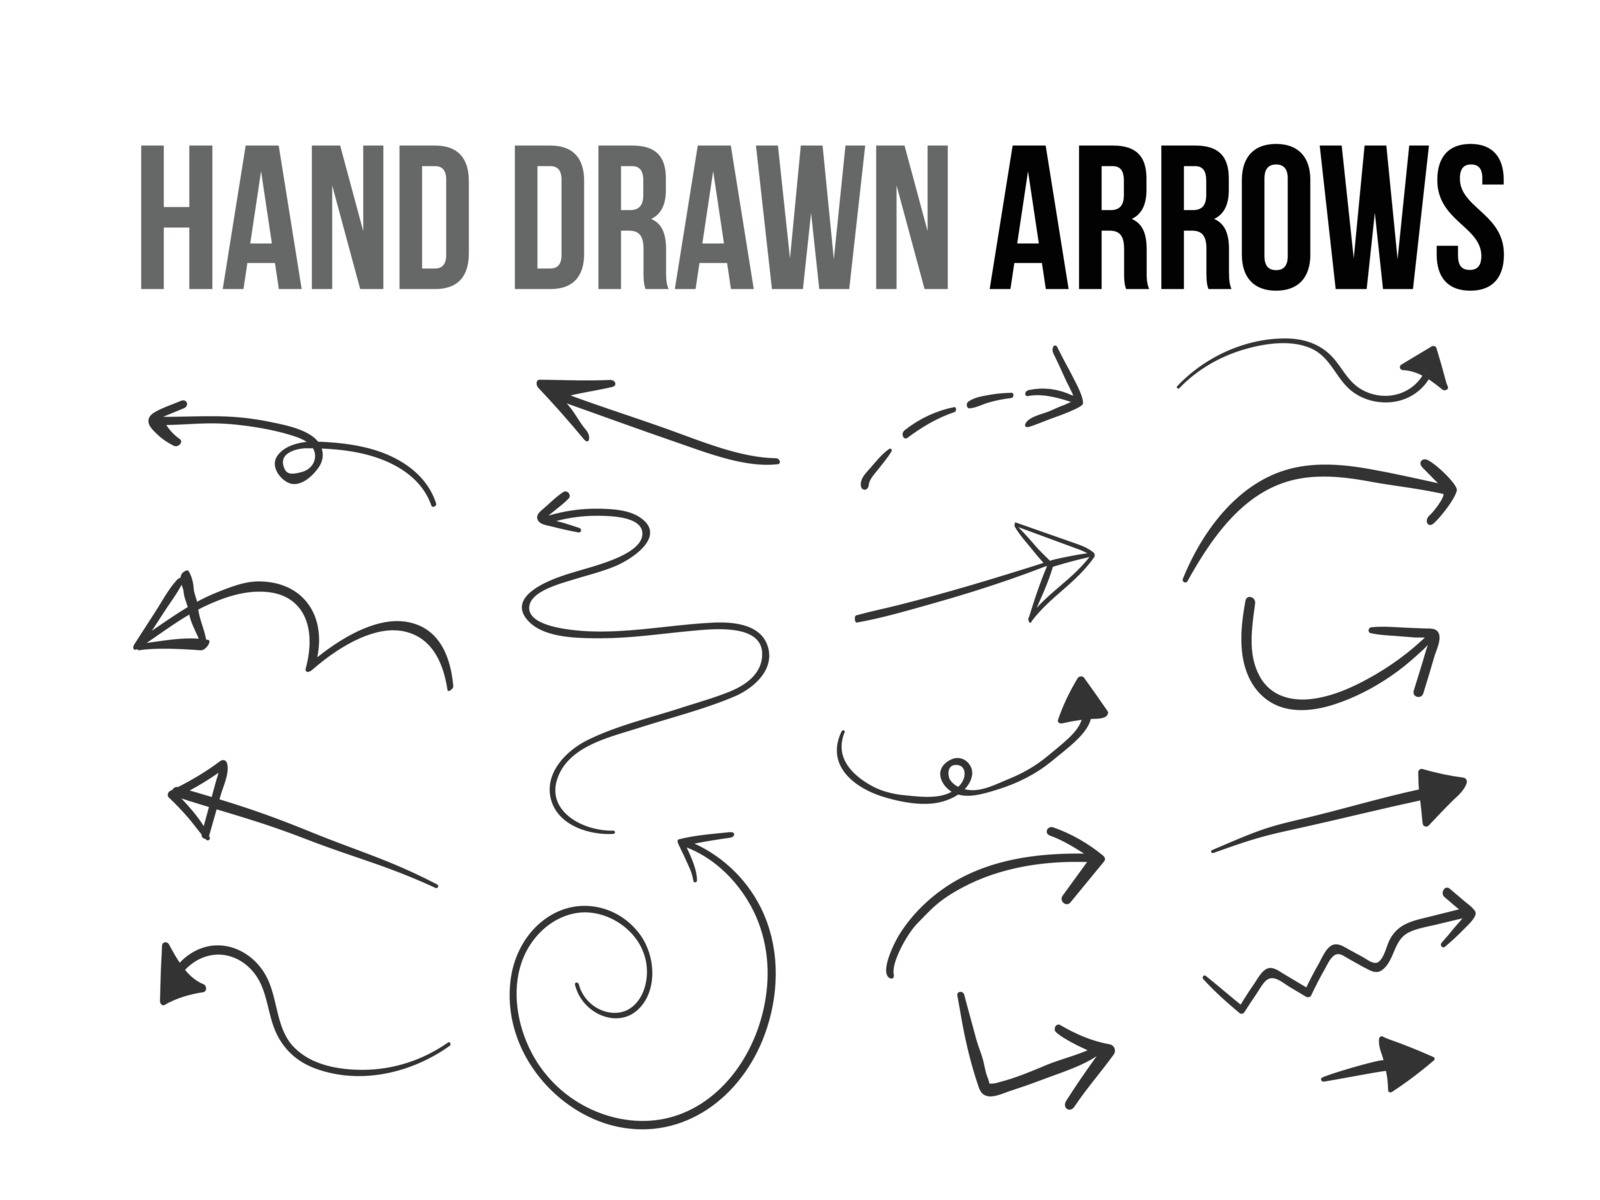 The vector hand drawn arrow design material collection set  by cougarsan